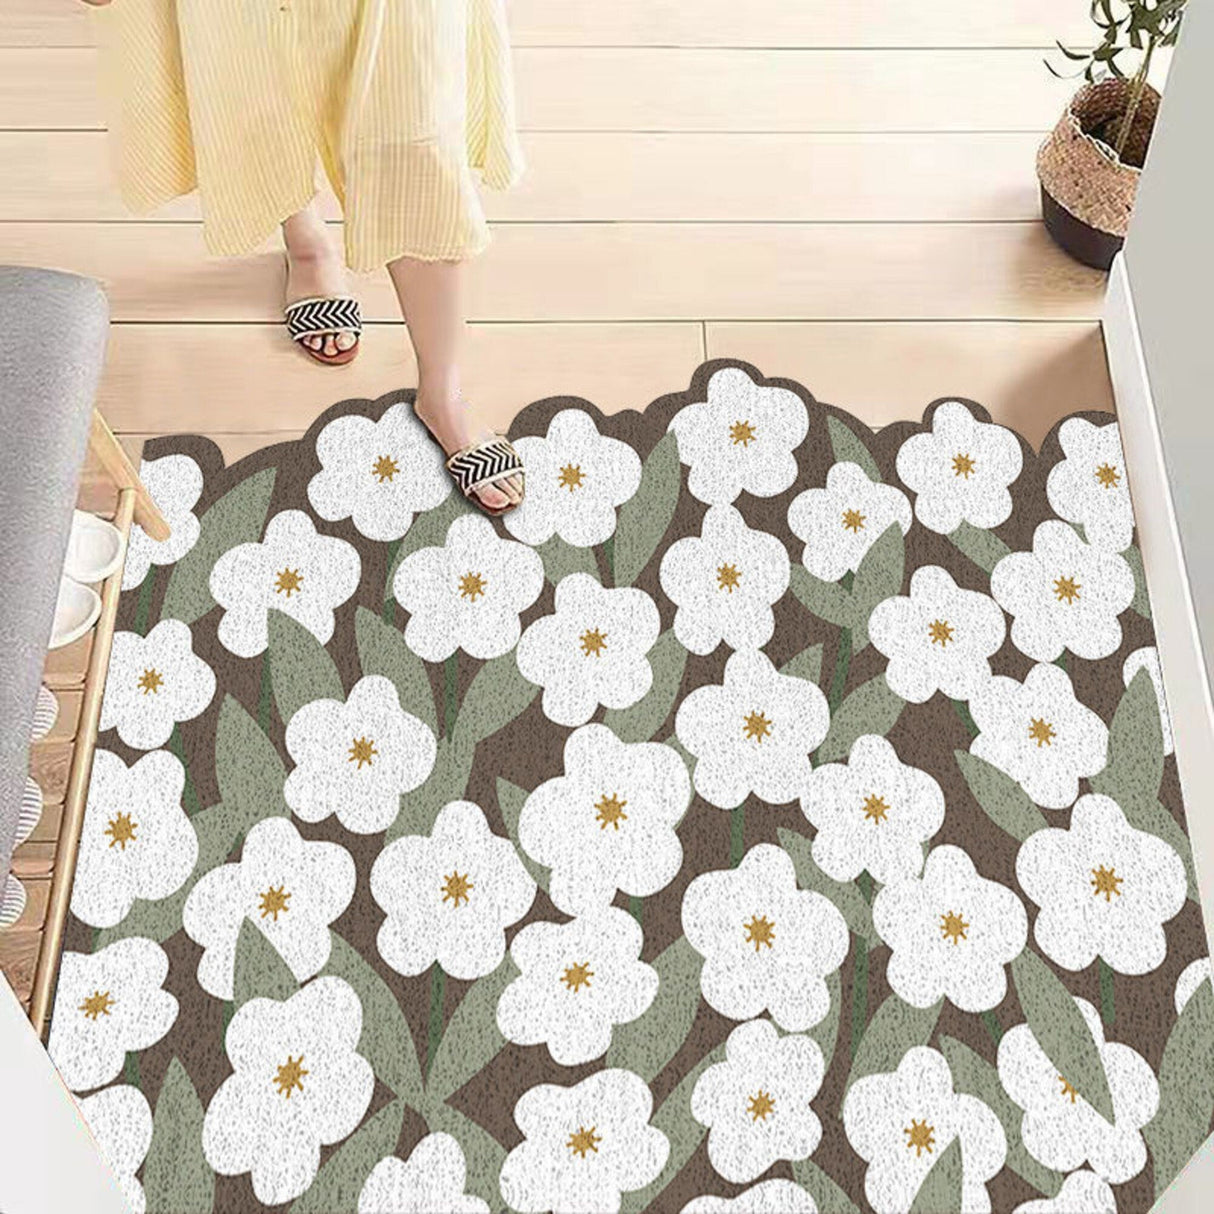 Feblilac White Flowers and Green Leaves PVC Coil Door Mat